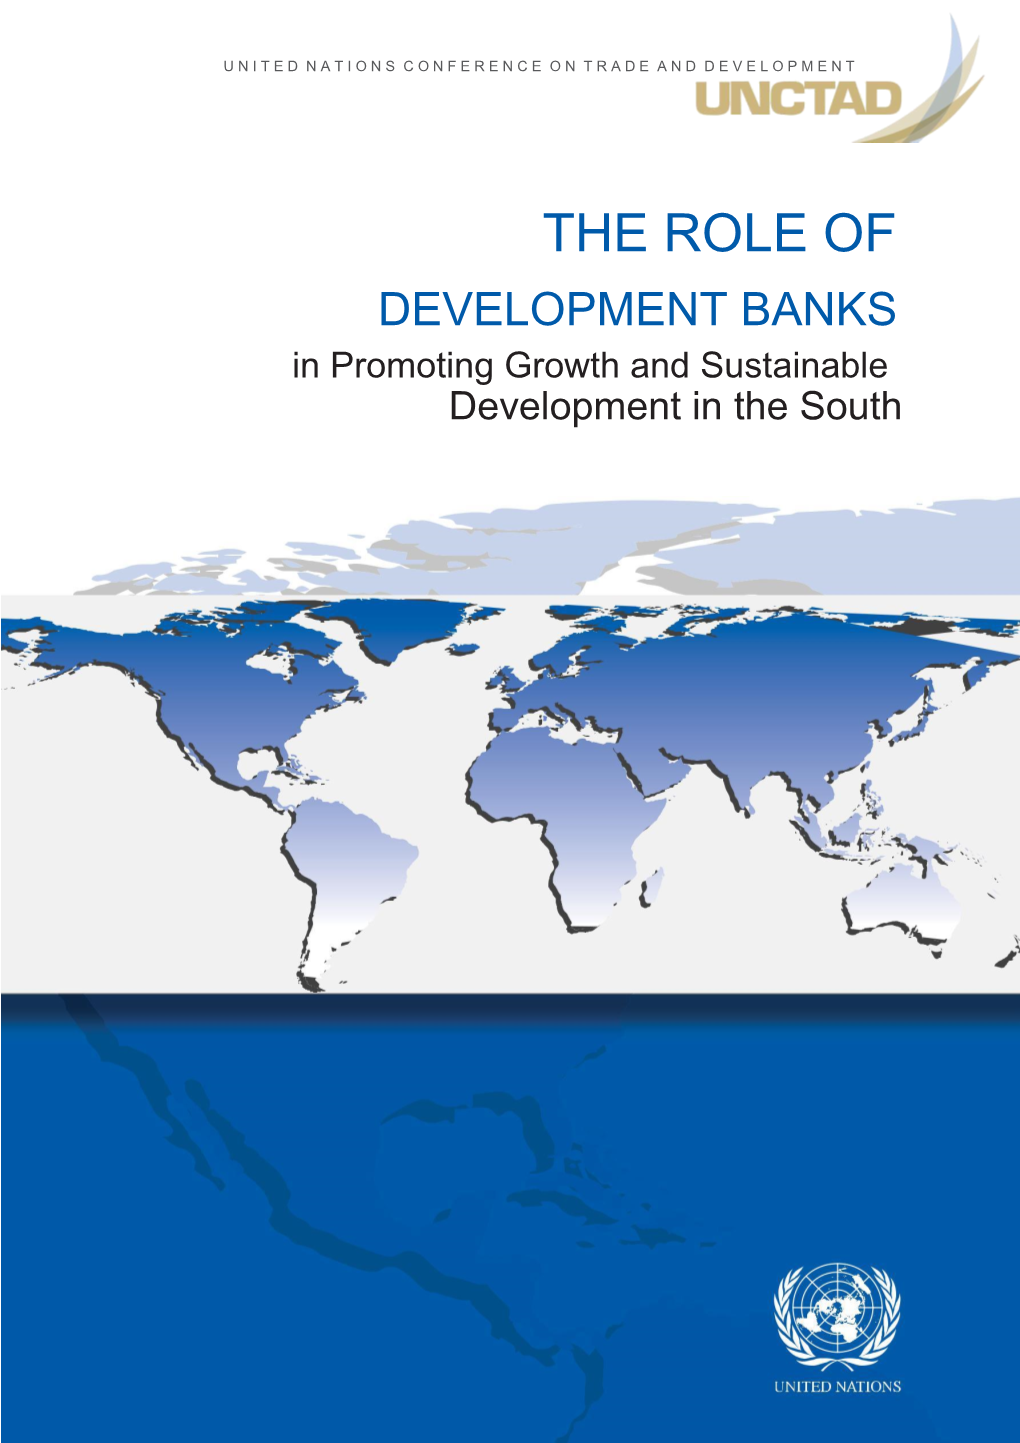 The Role of Development Banks in Promoting Growth and Sustainable